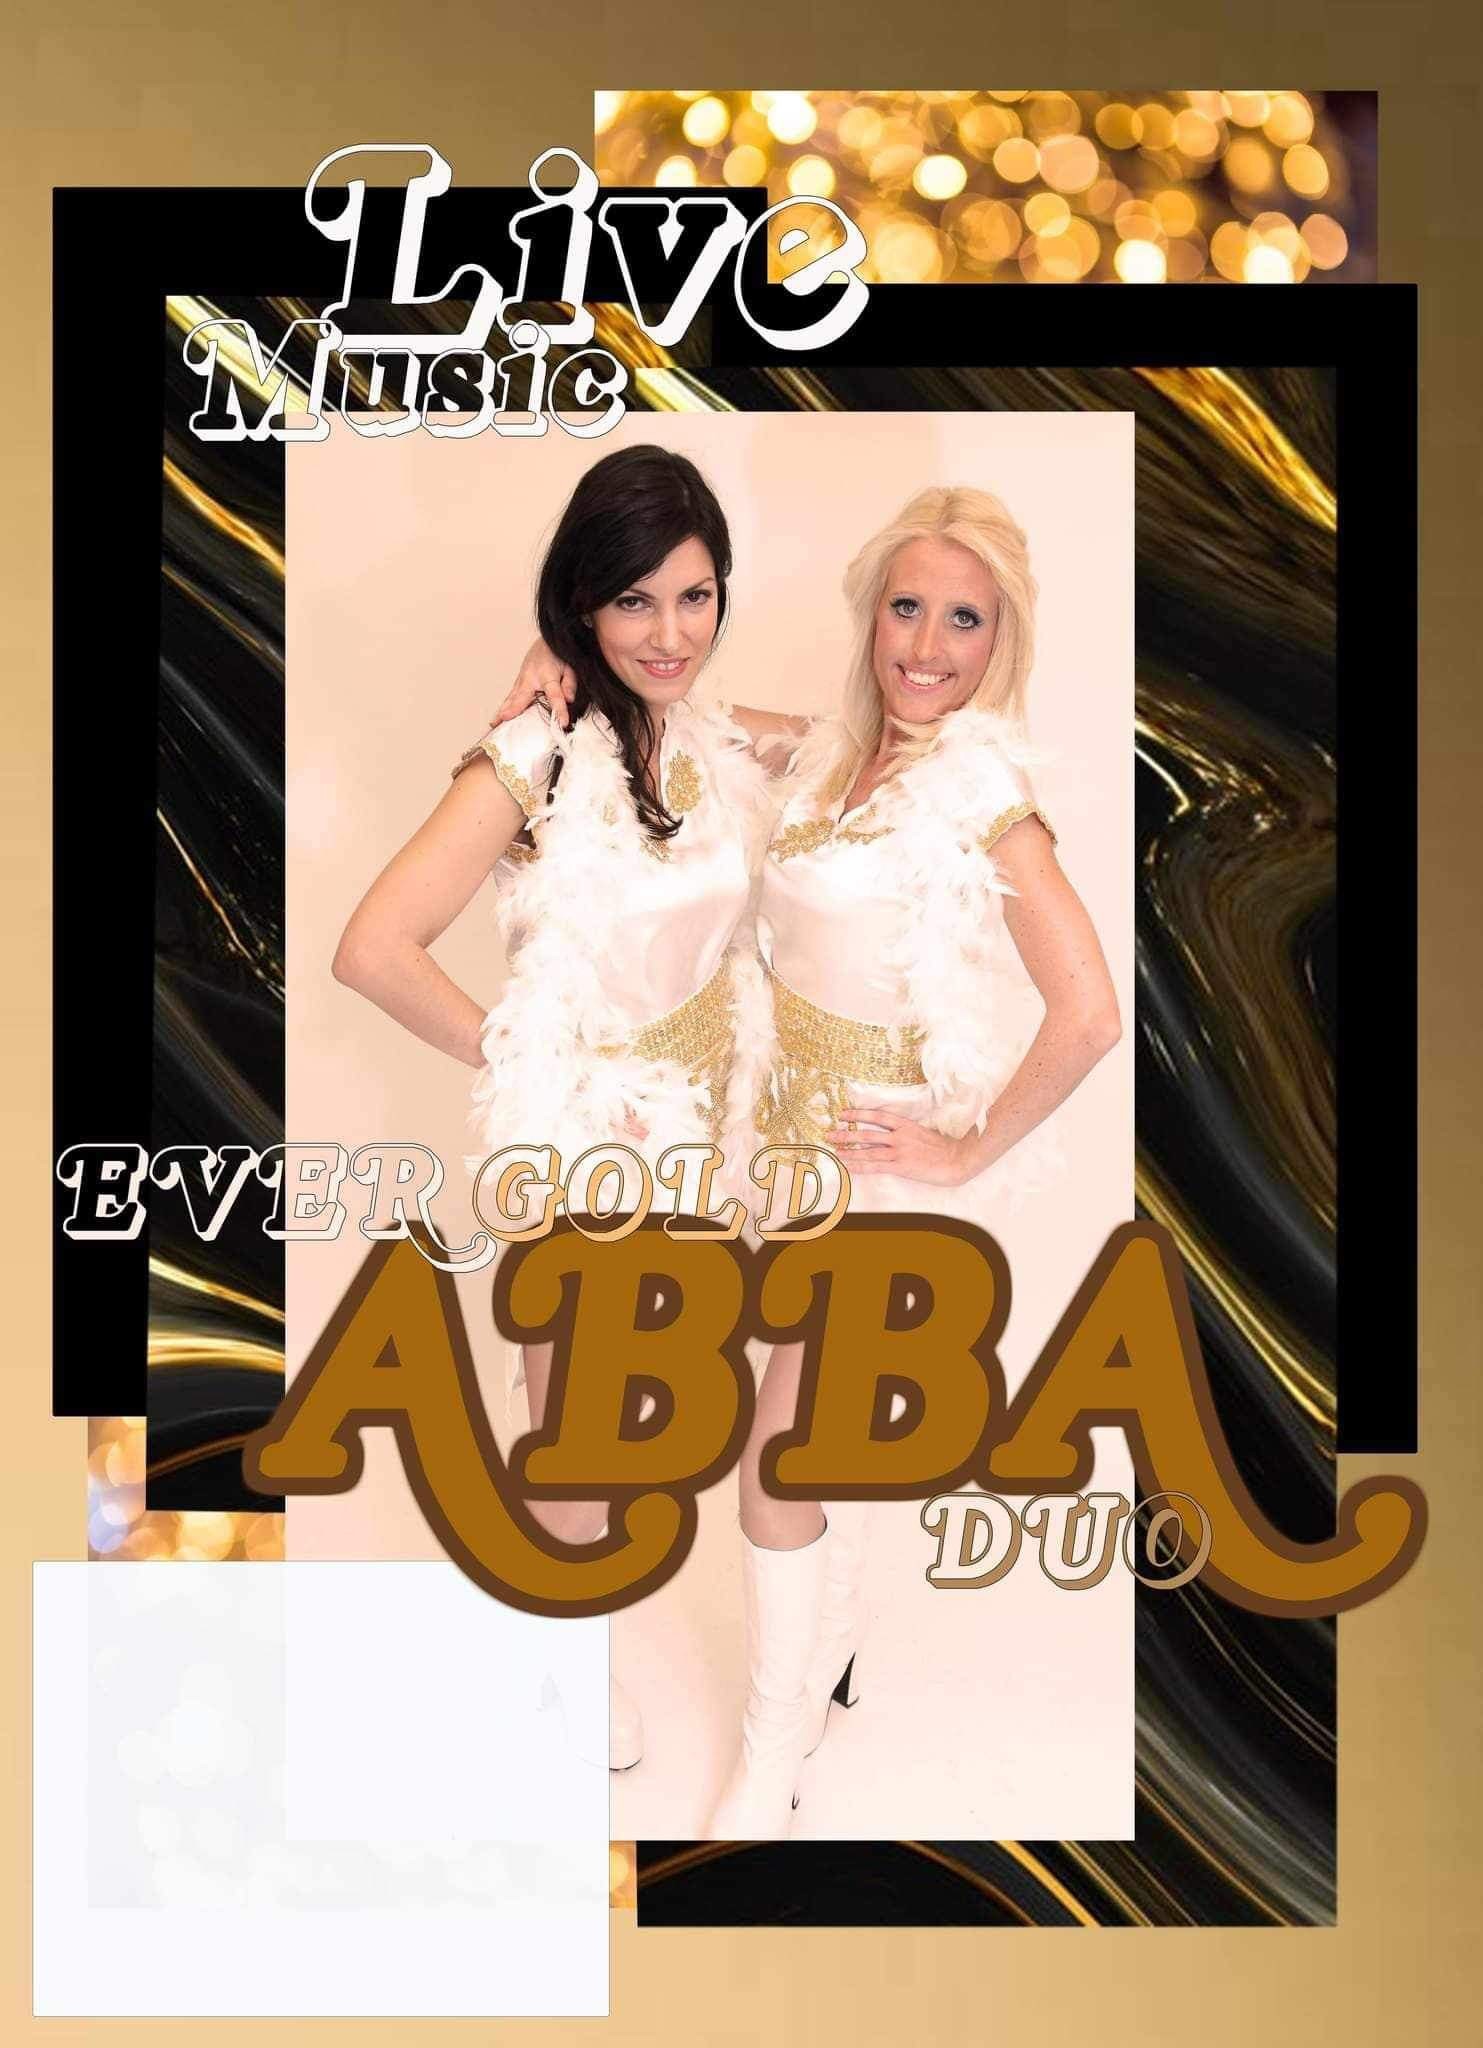 Abba Duo  on Feb 17, 19:30@Leverington Sports and Social Club - Buy tickets and Get information on whittlesey music nights 